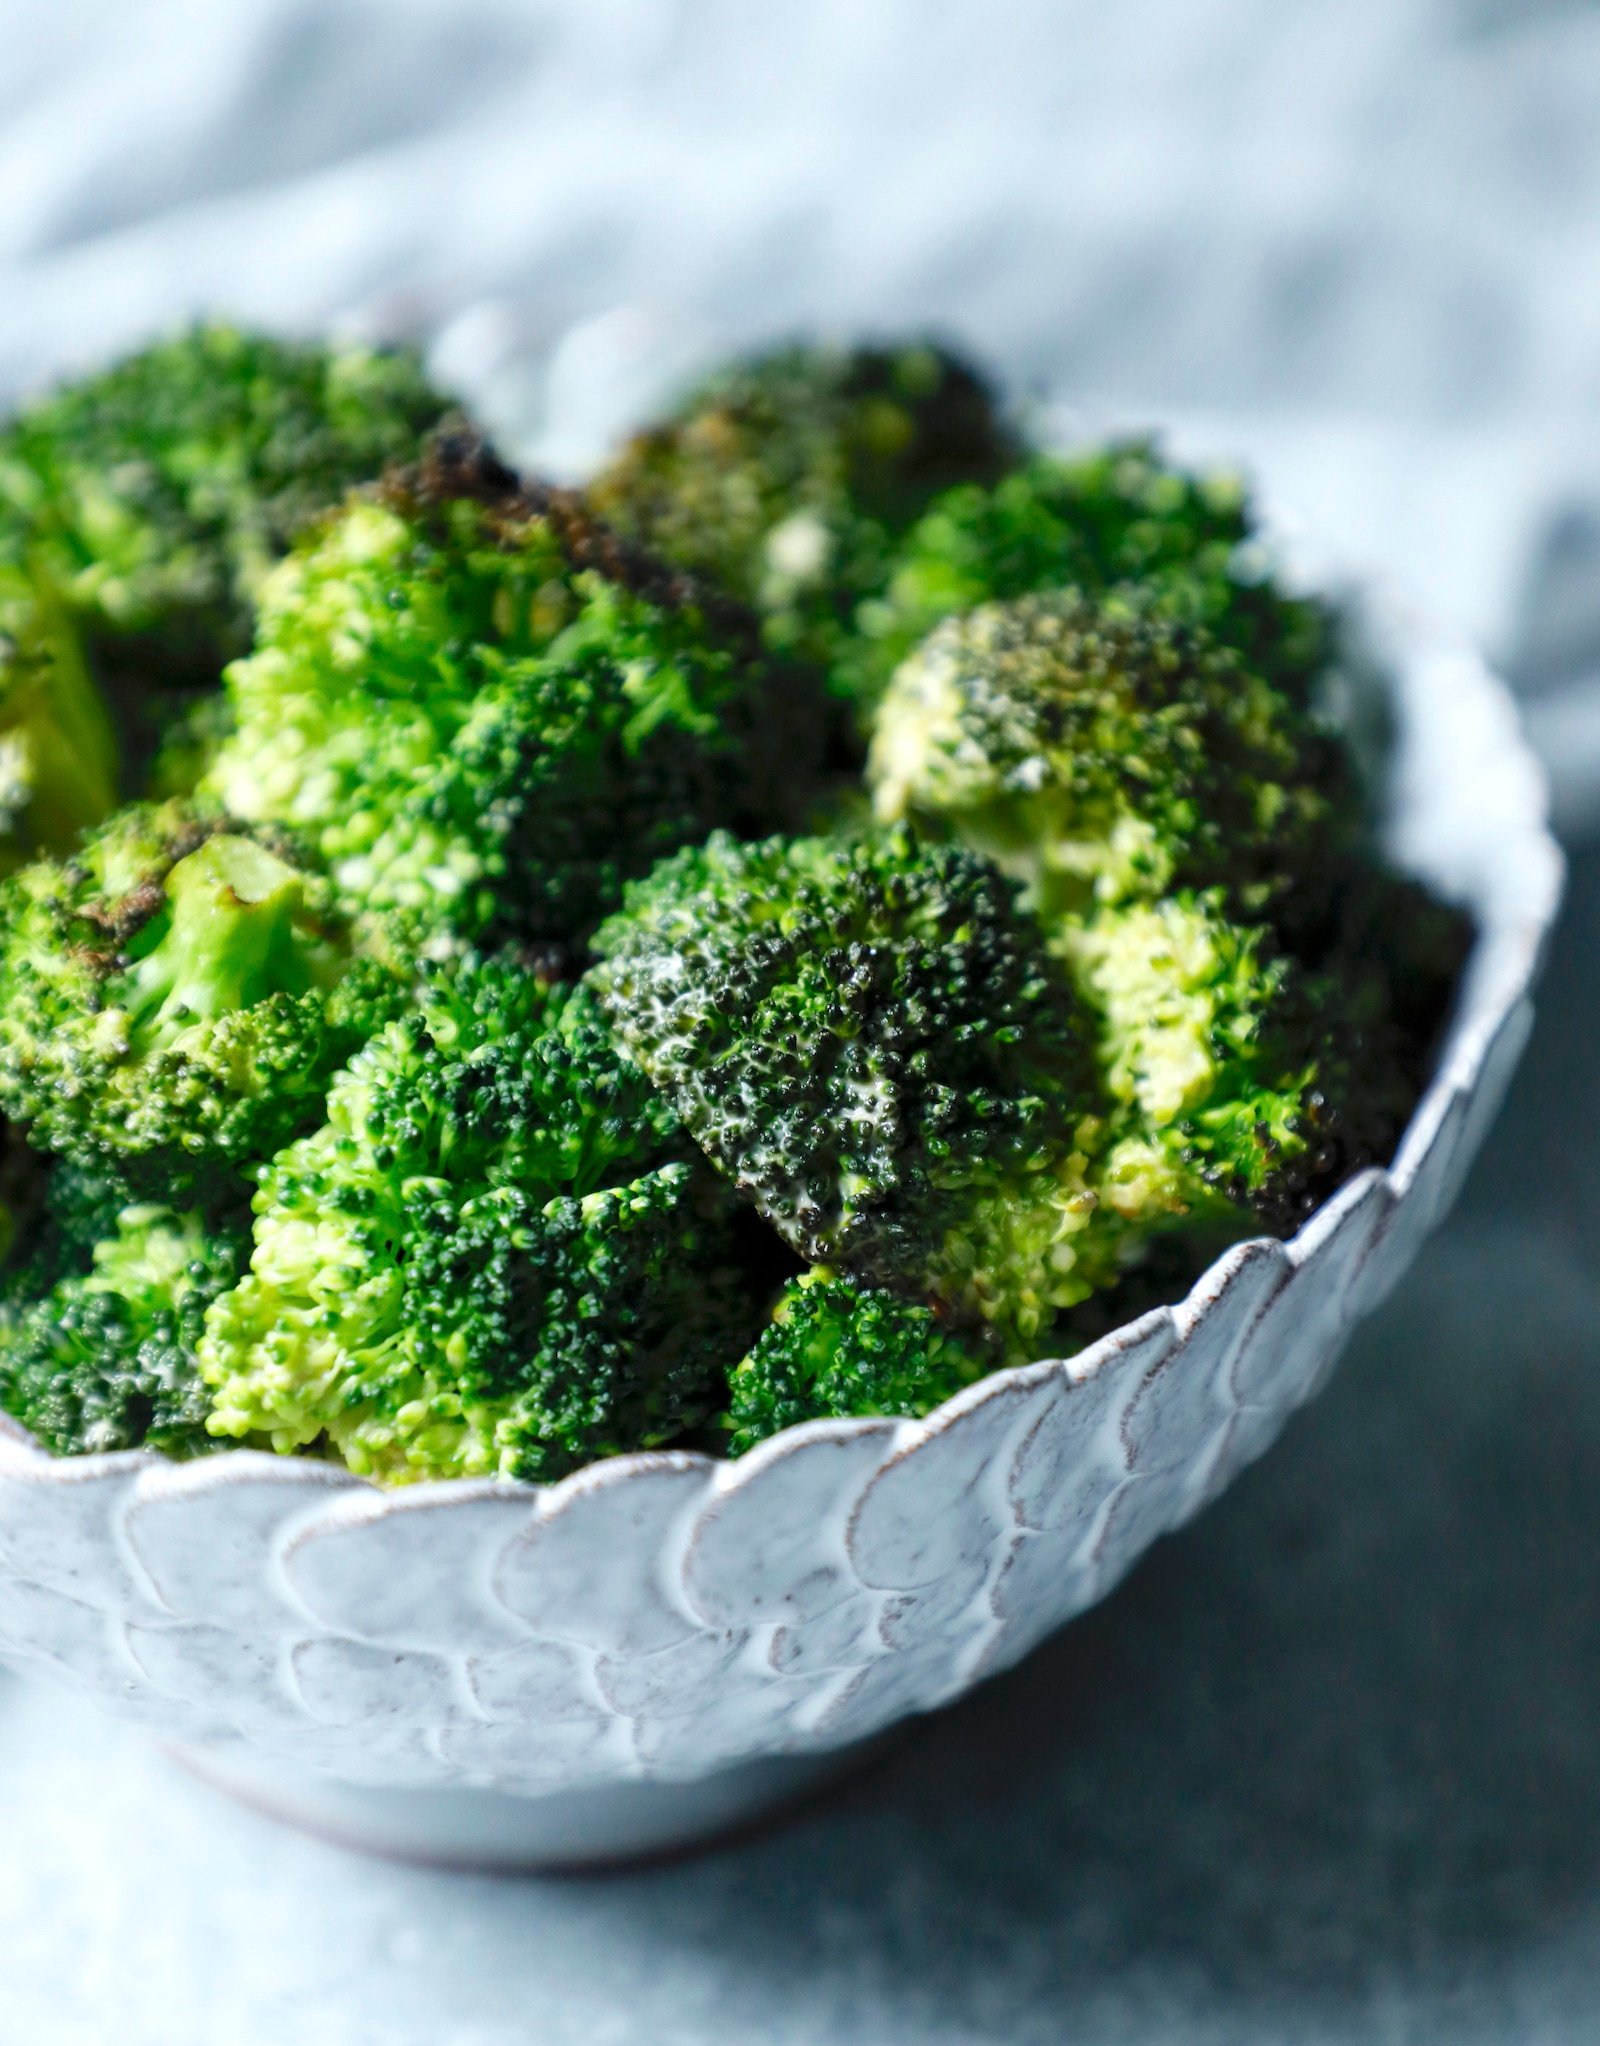 Front view of a white pottery bowl on a grey background filled with florets of sriracha roasted broccoli.